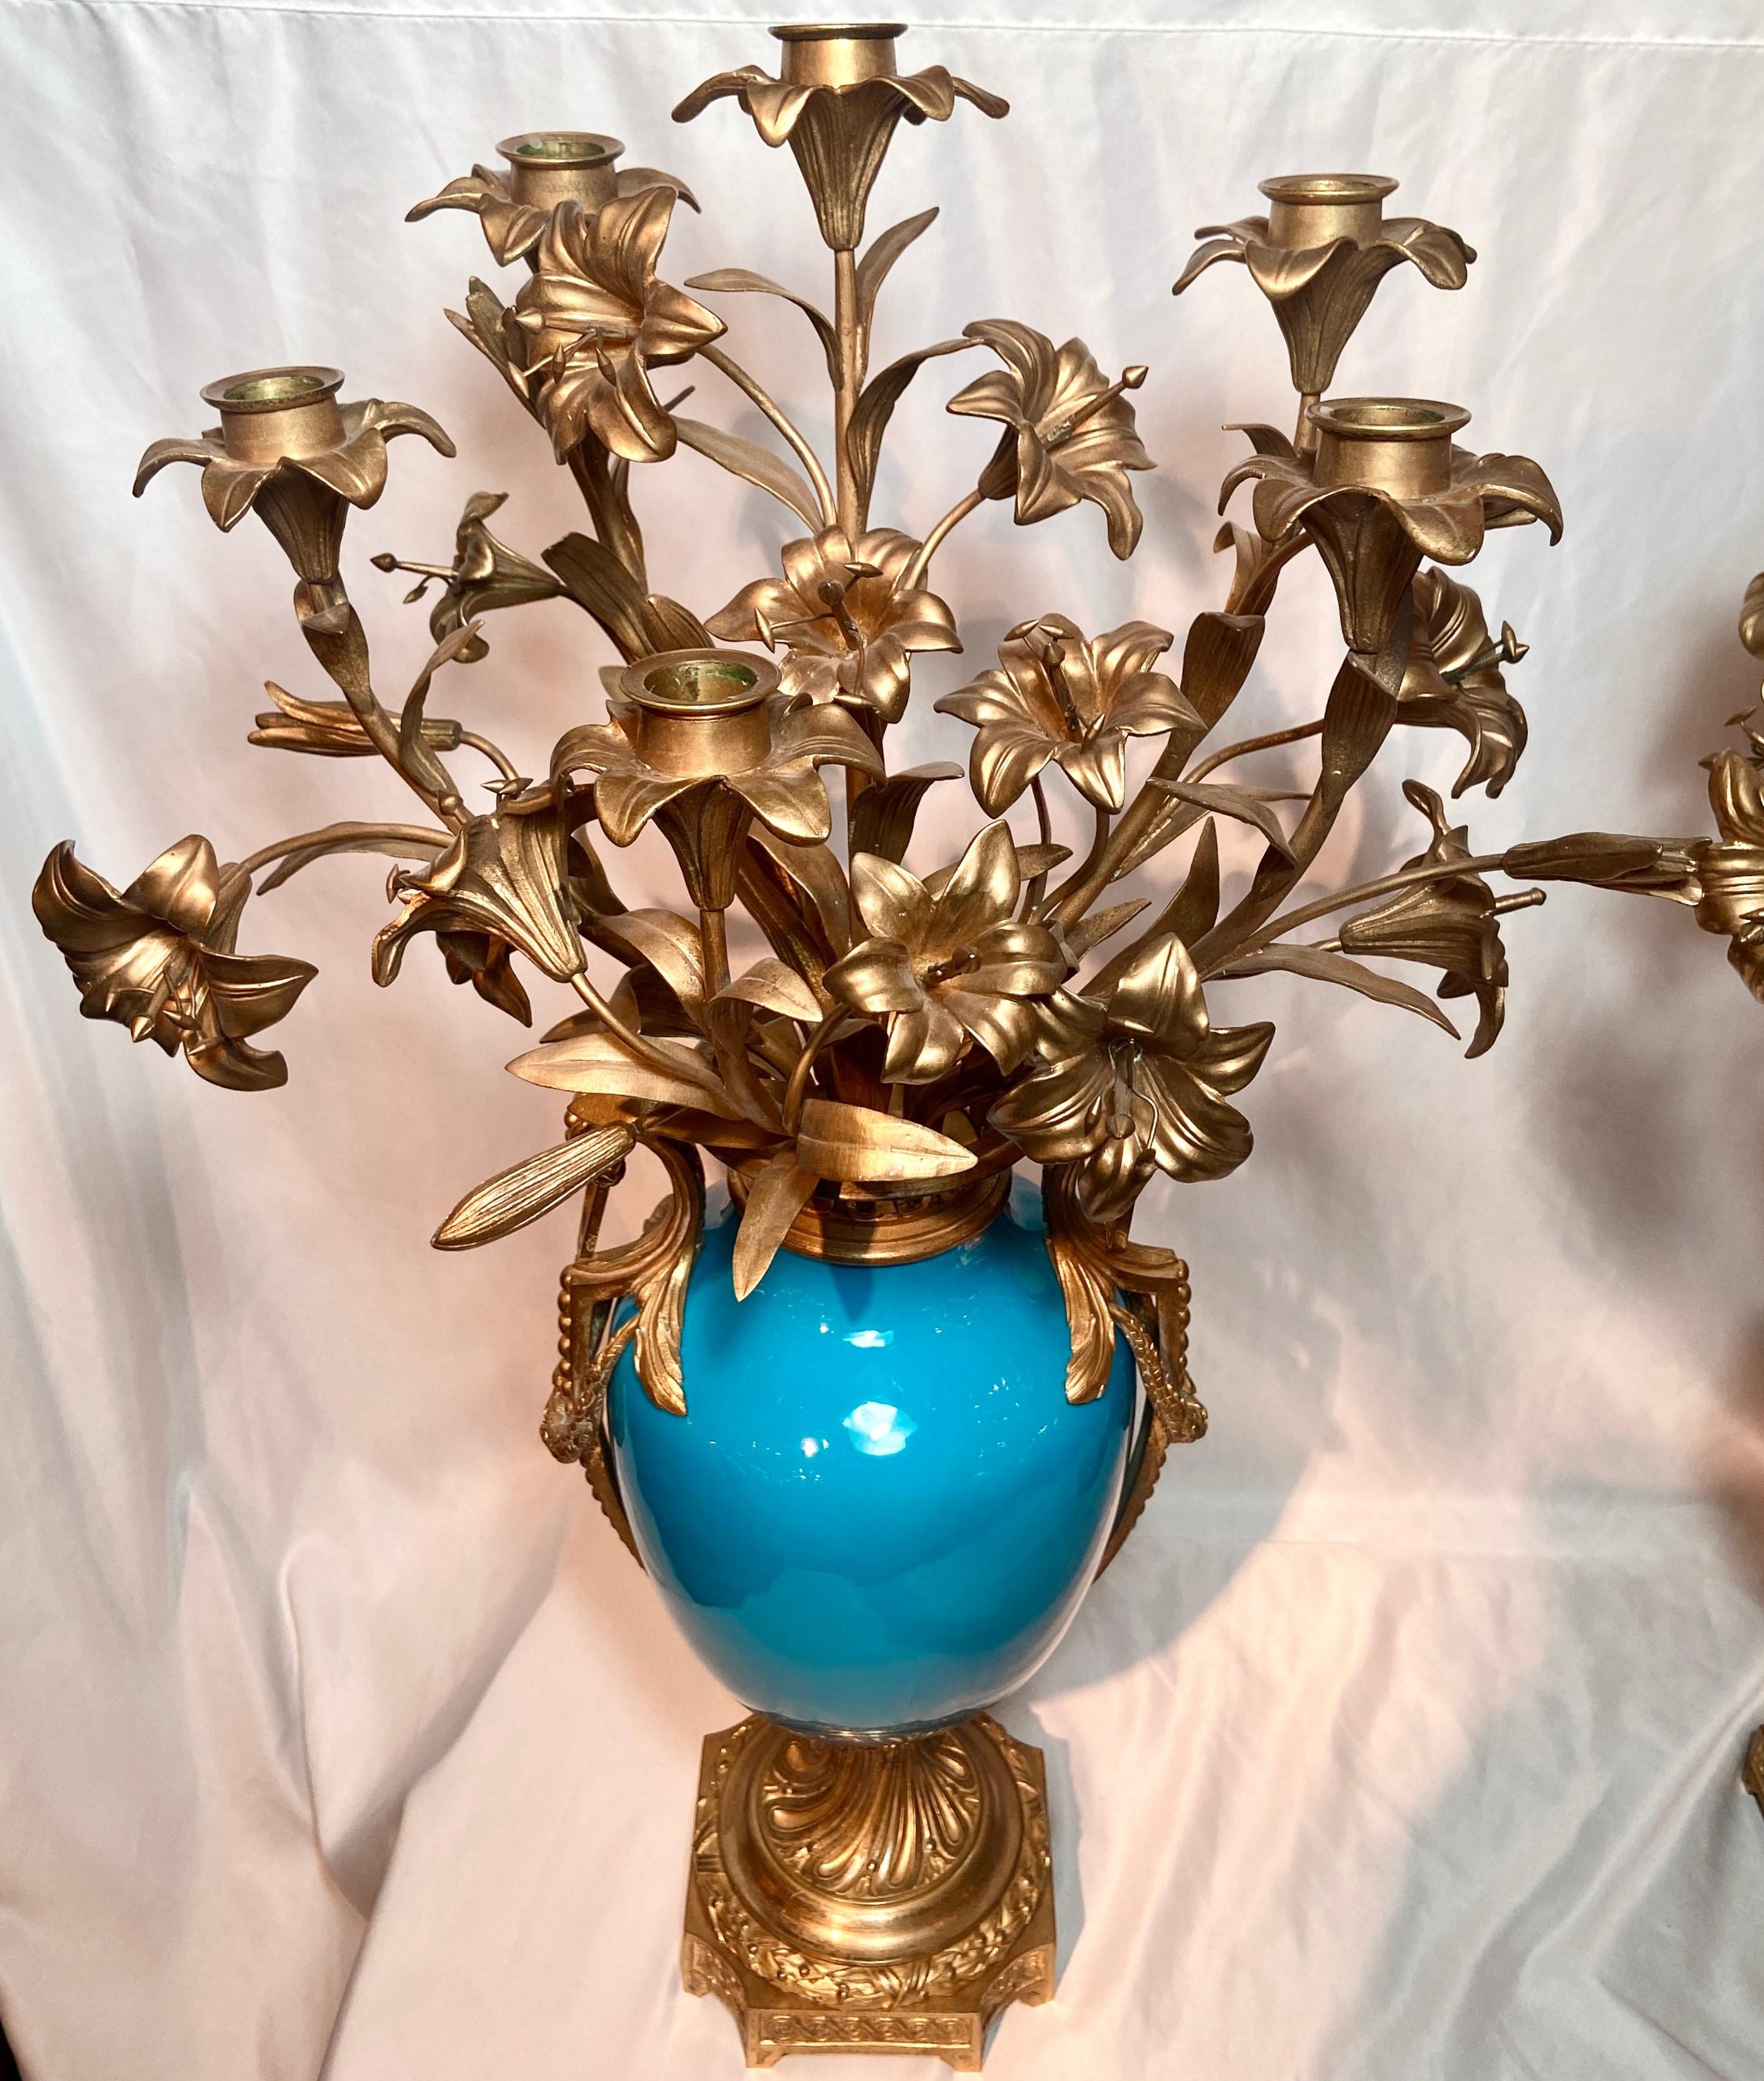 Pair Antique French Blue Sèvres Porcelain Ormolu Candelabra, Circa 1870-1880 In Good Condition For Sale In New Orleans, LA